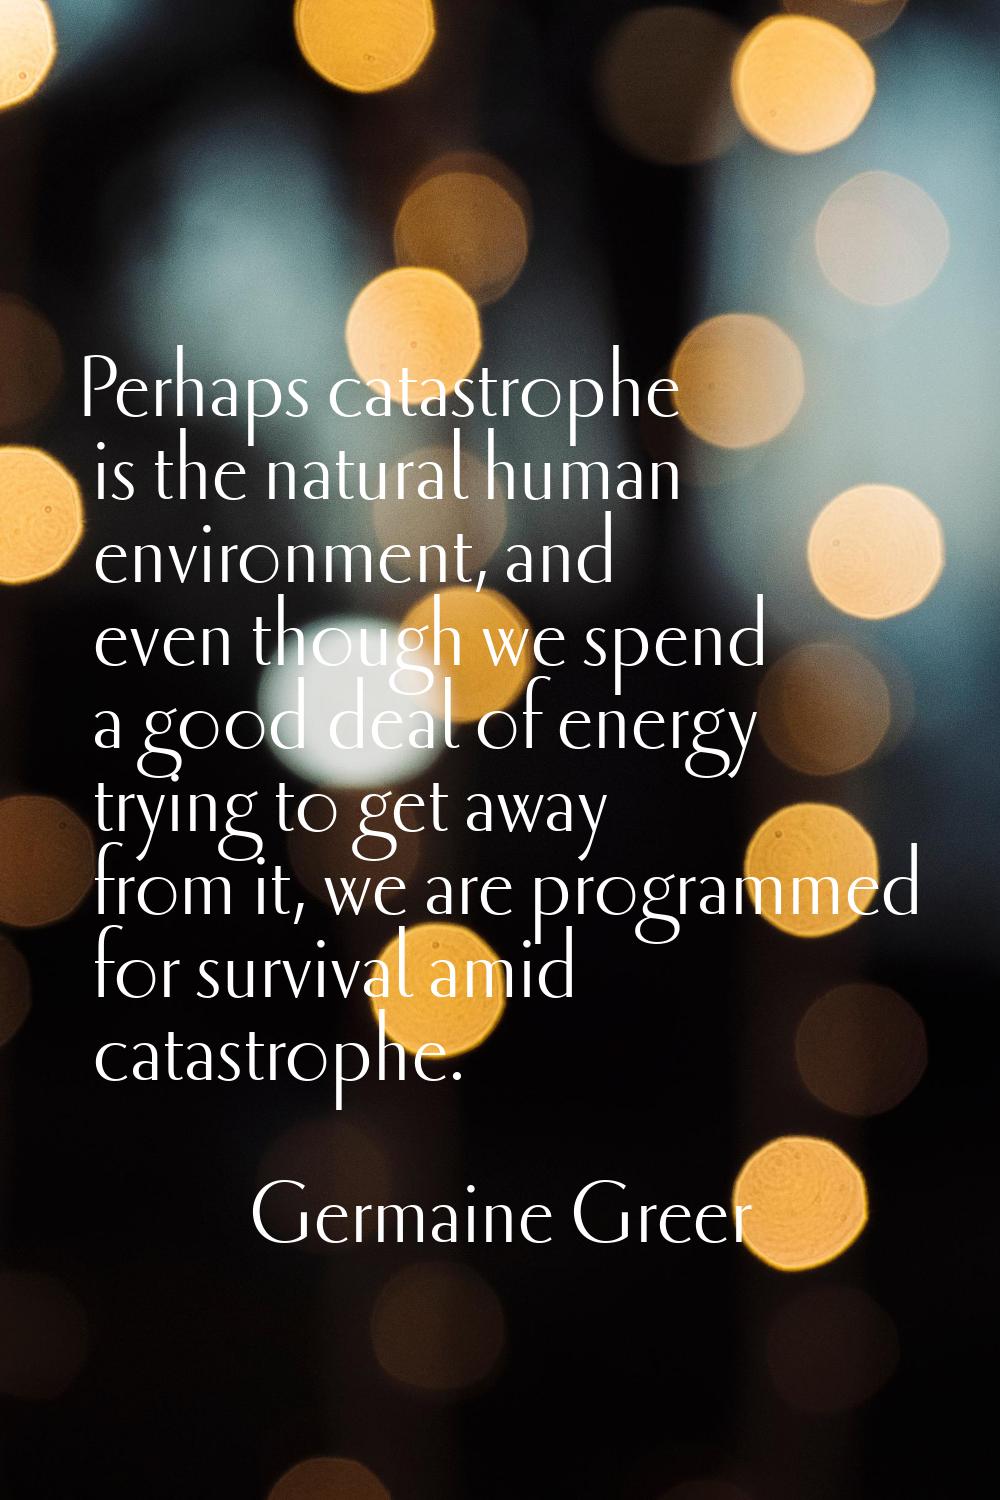 Perhaps catastrophe is the natural human environment, and even though we spend a good deal of energ